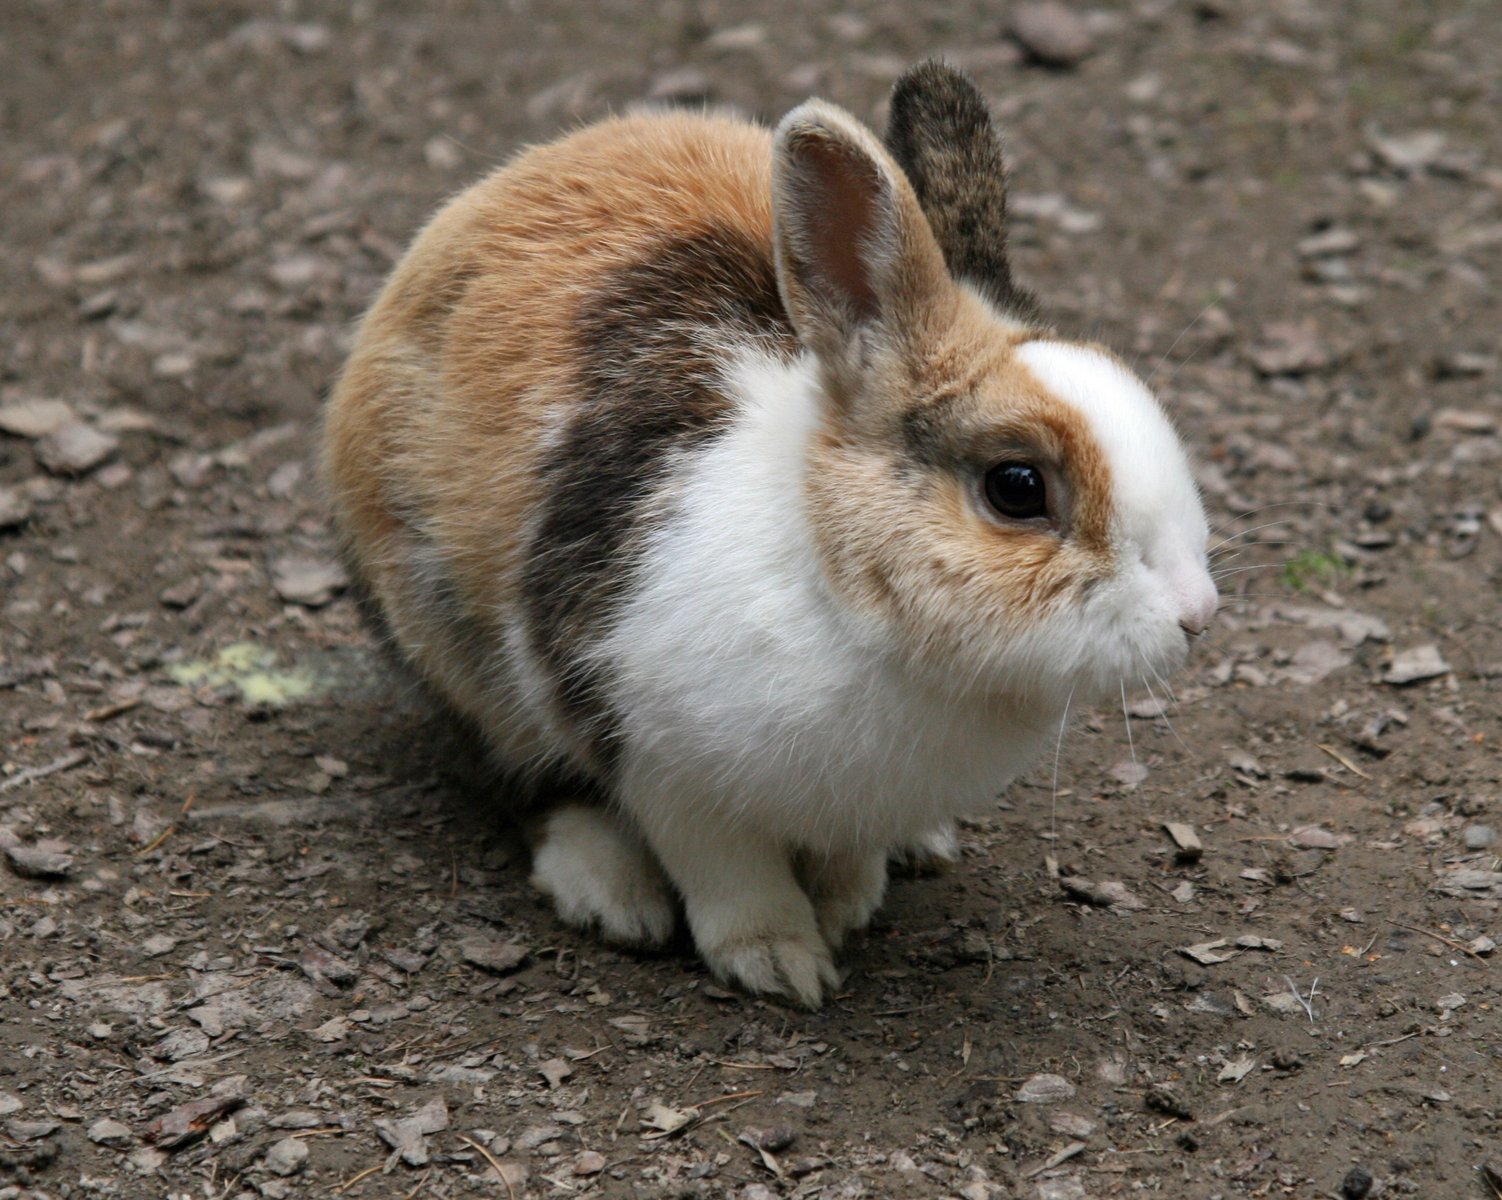 a small rabbit sitting on the ground